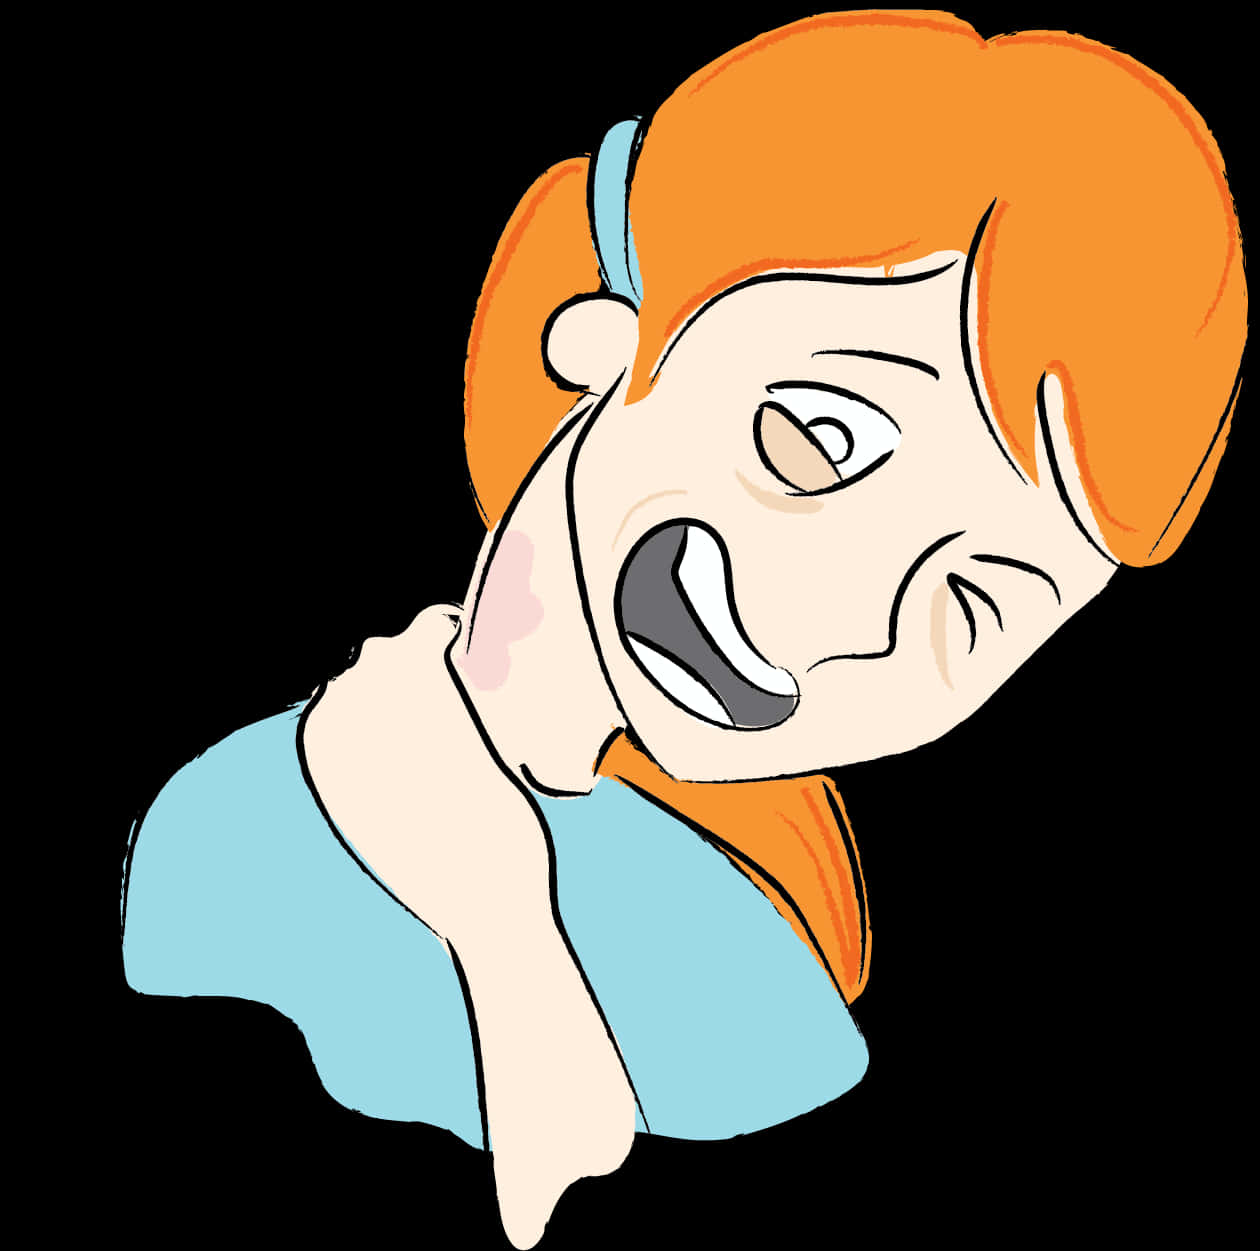 A Cartoon Of A Woman With Red Hair